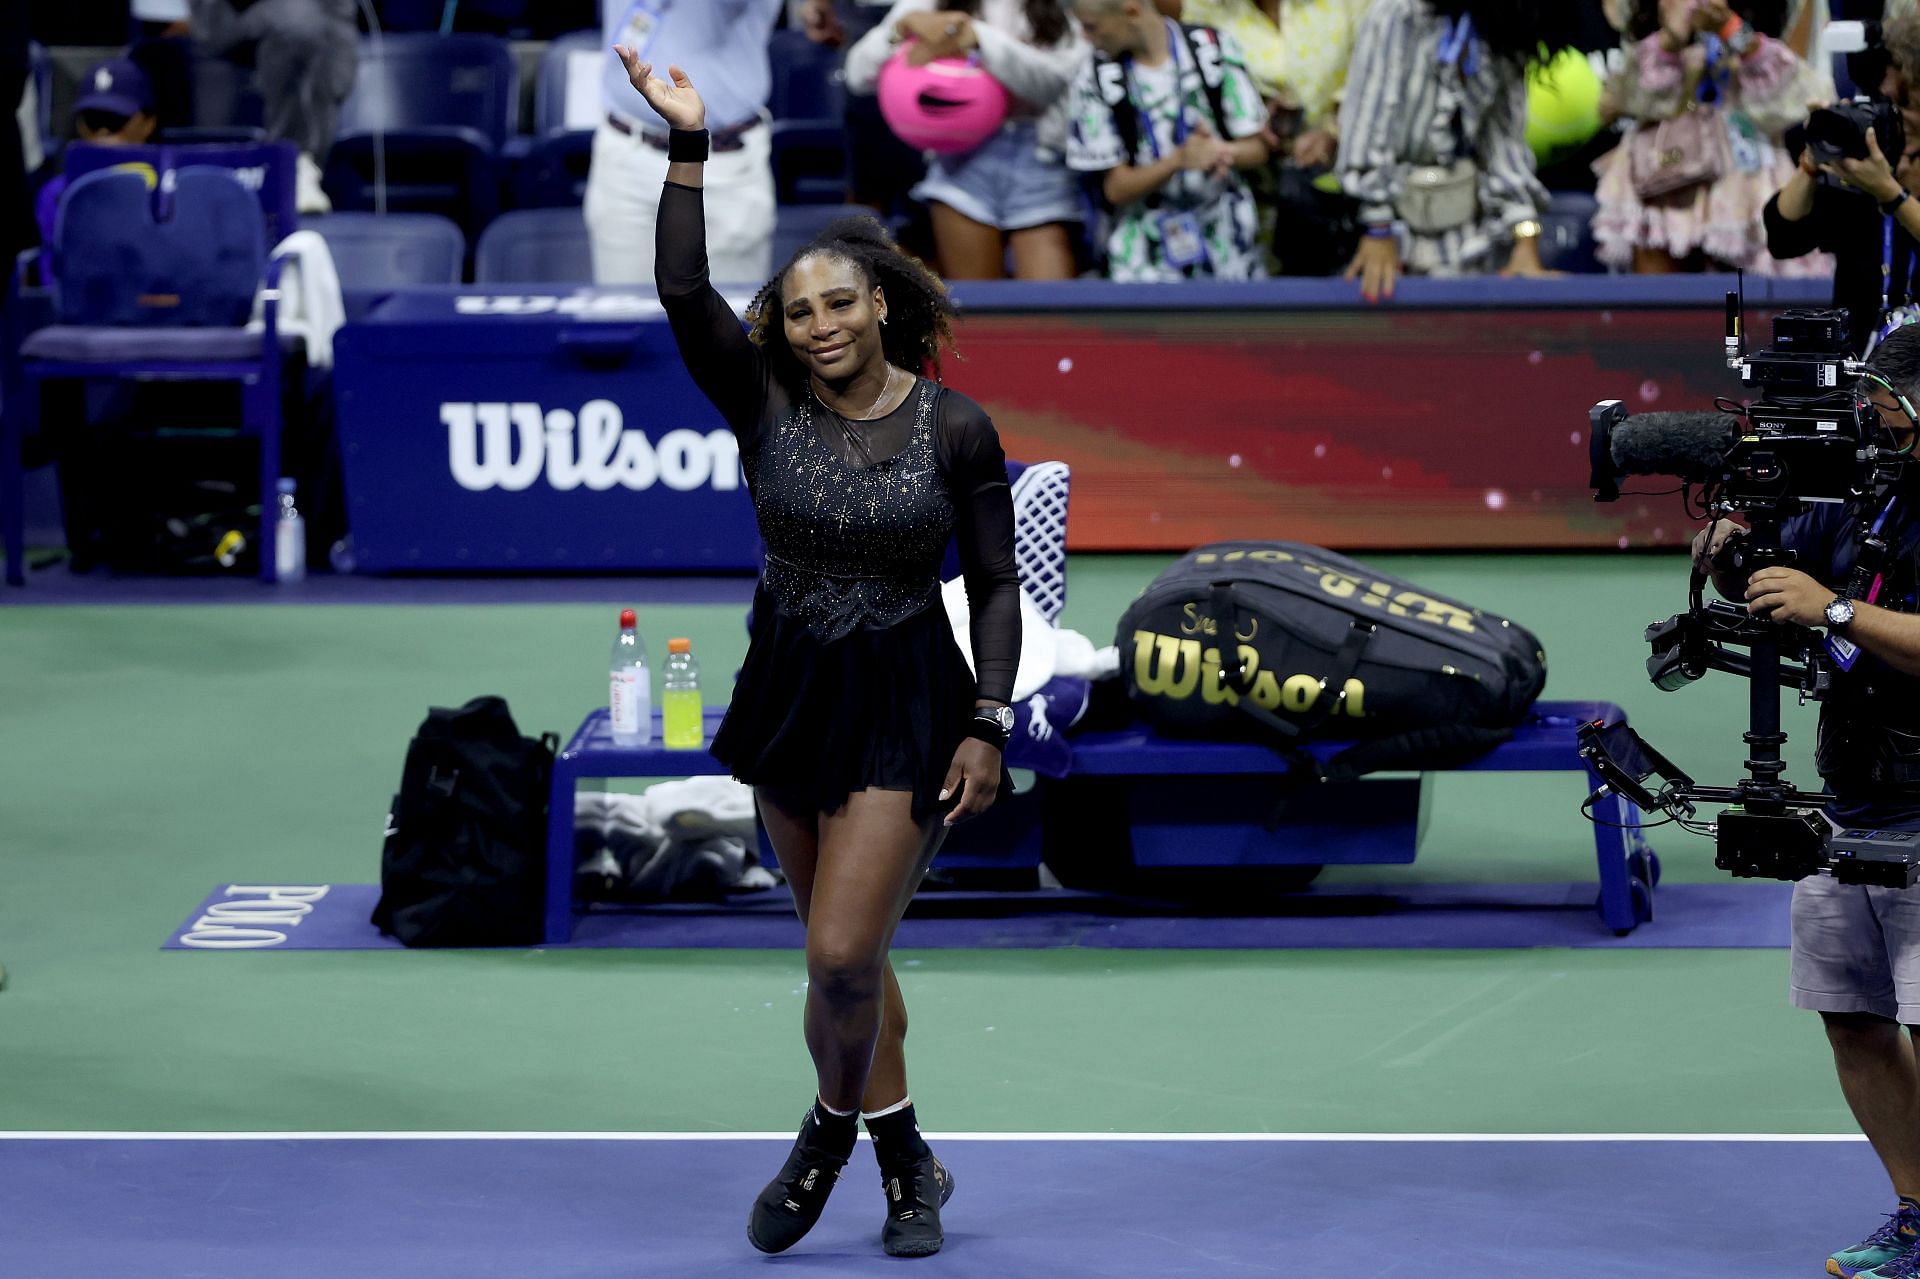 Serena Williams waves to her fans at the 2022 US Open